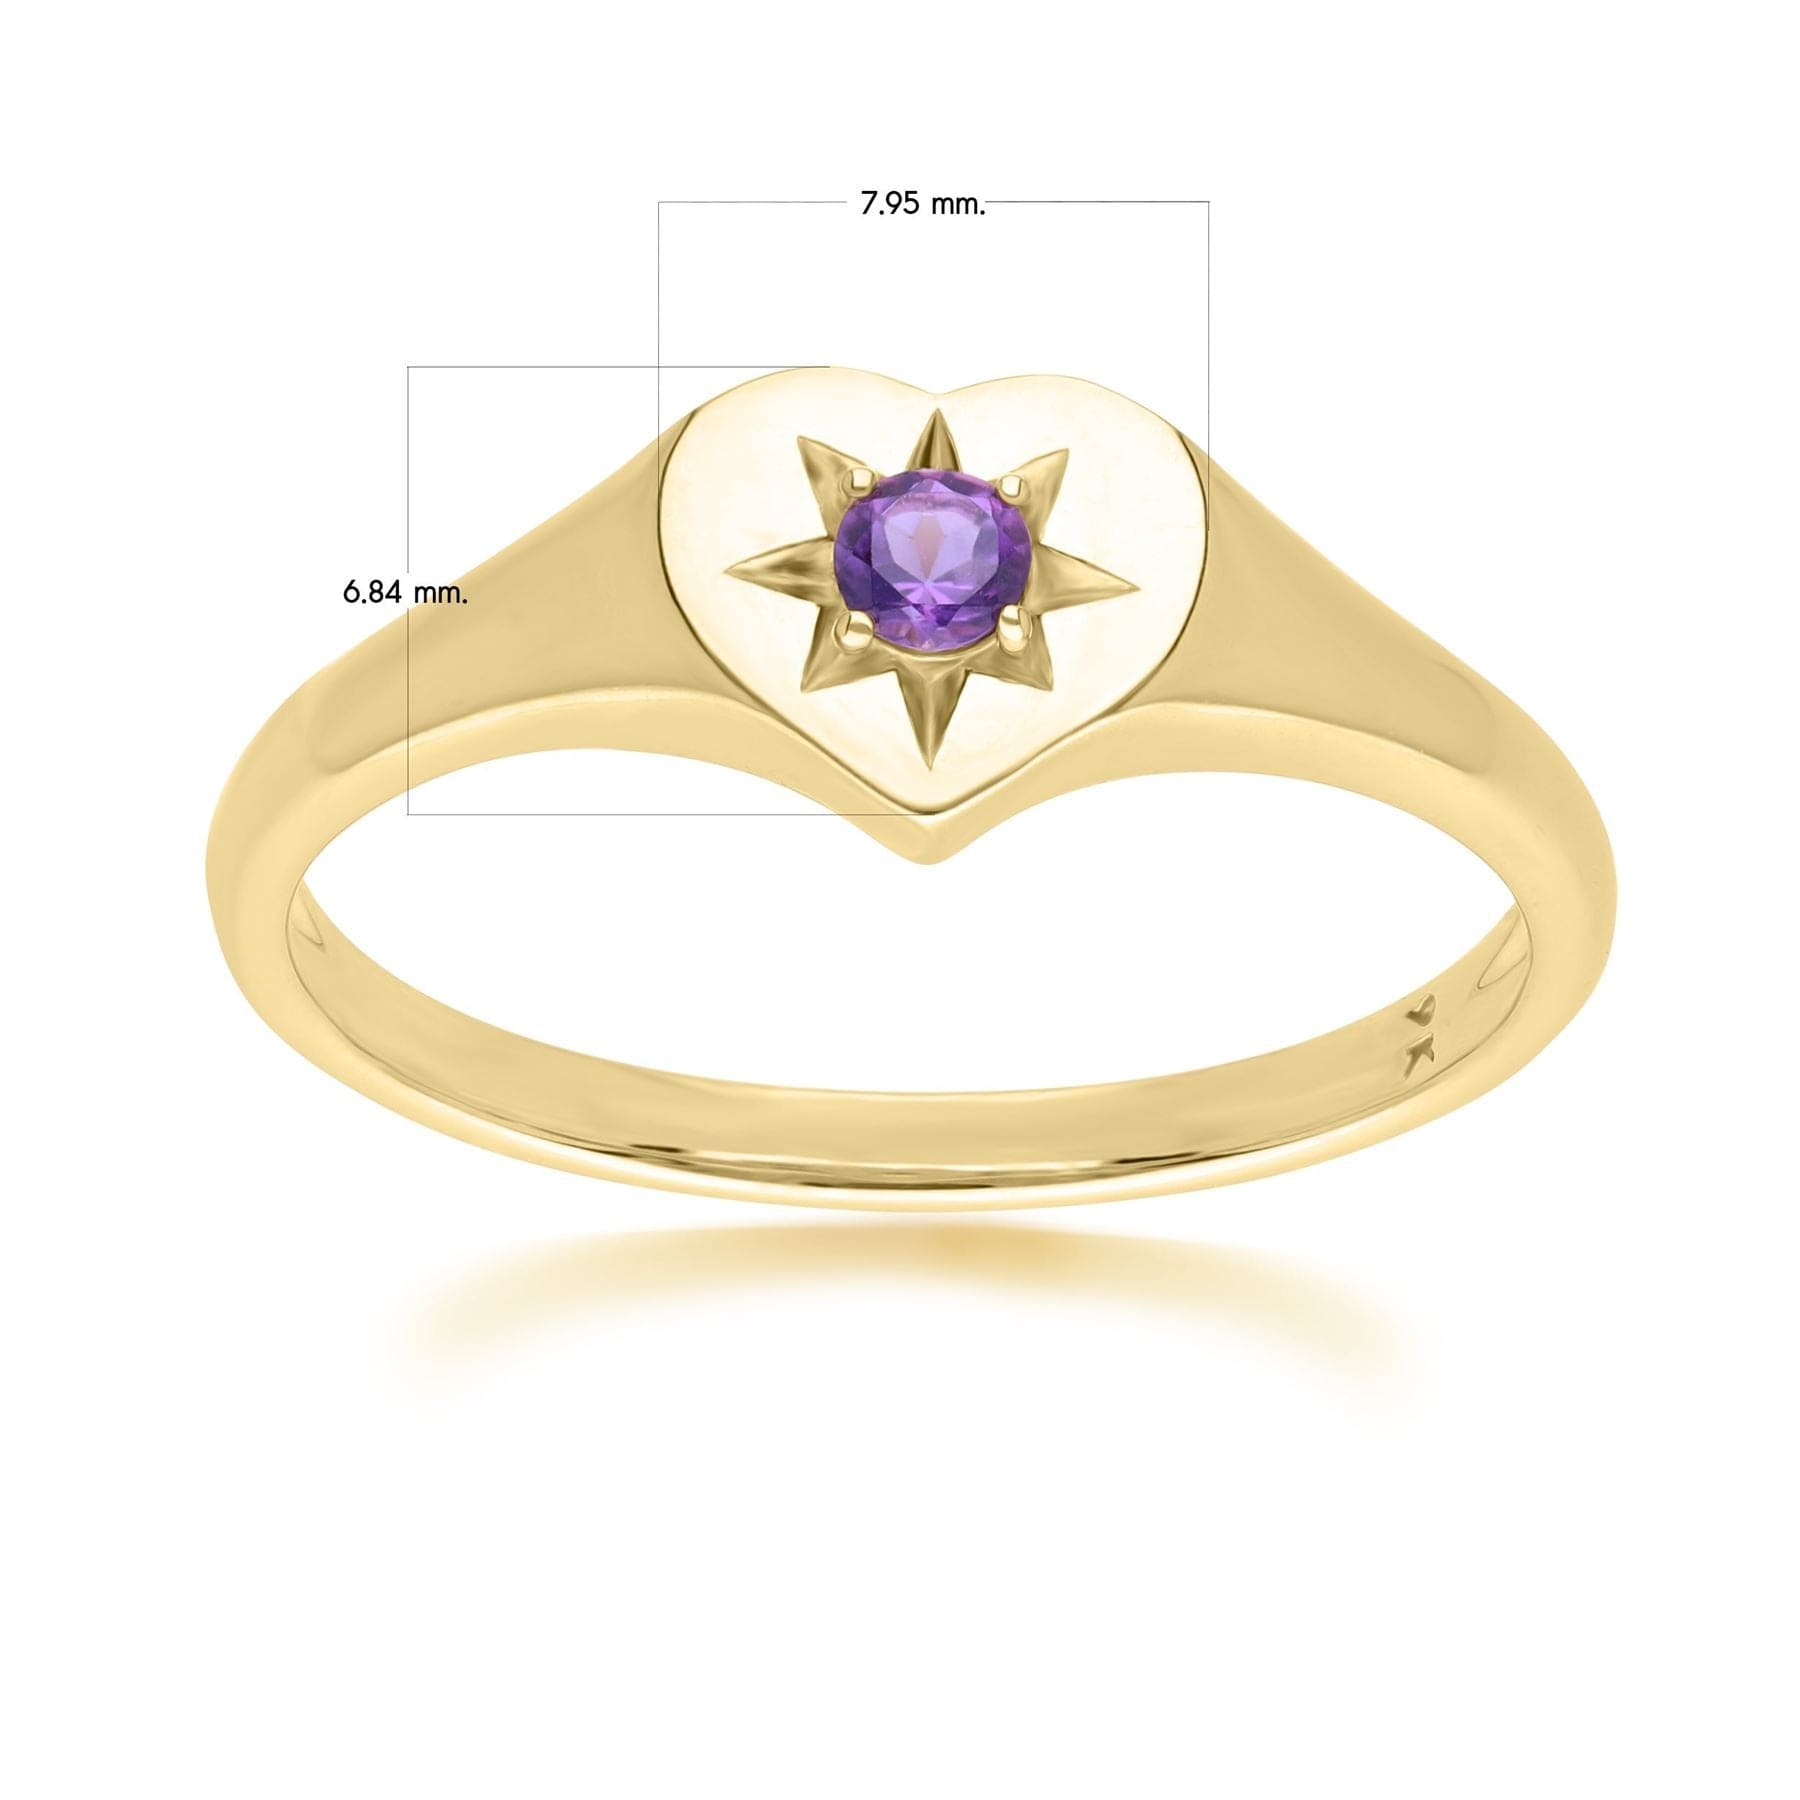 135R2055029 ECFEW™ 'The Liberator' Amethyst Heart Ring in 9ct Yellow Gold Dimensions